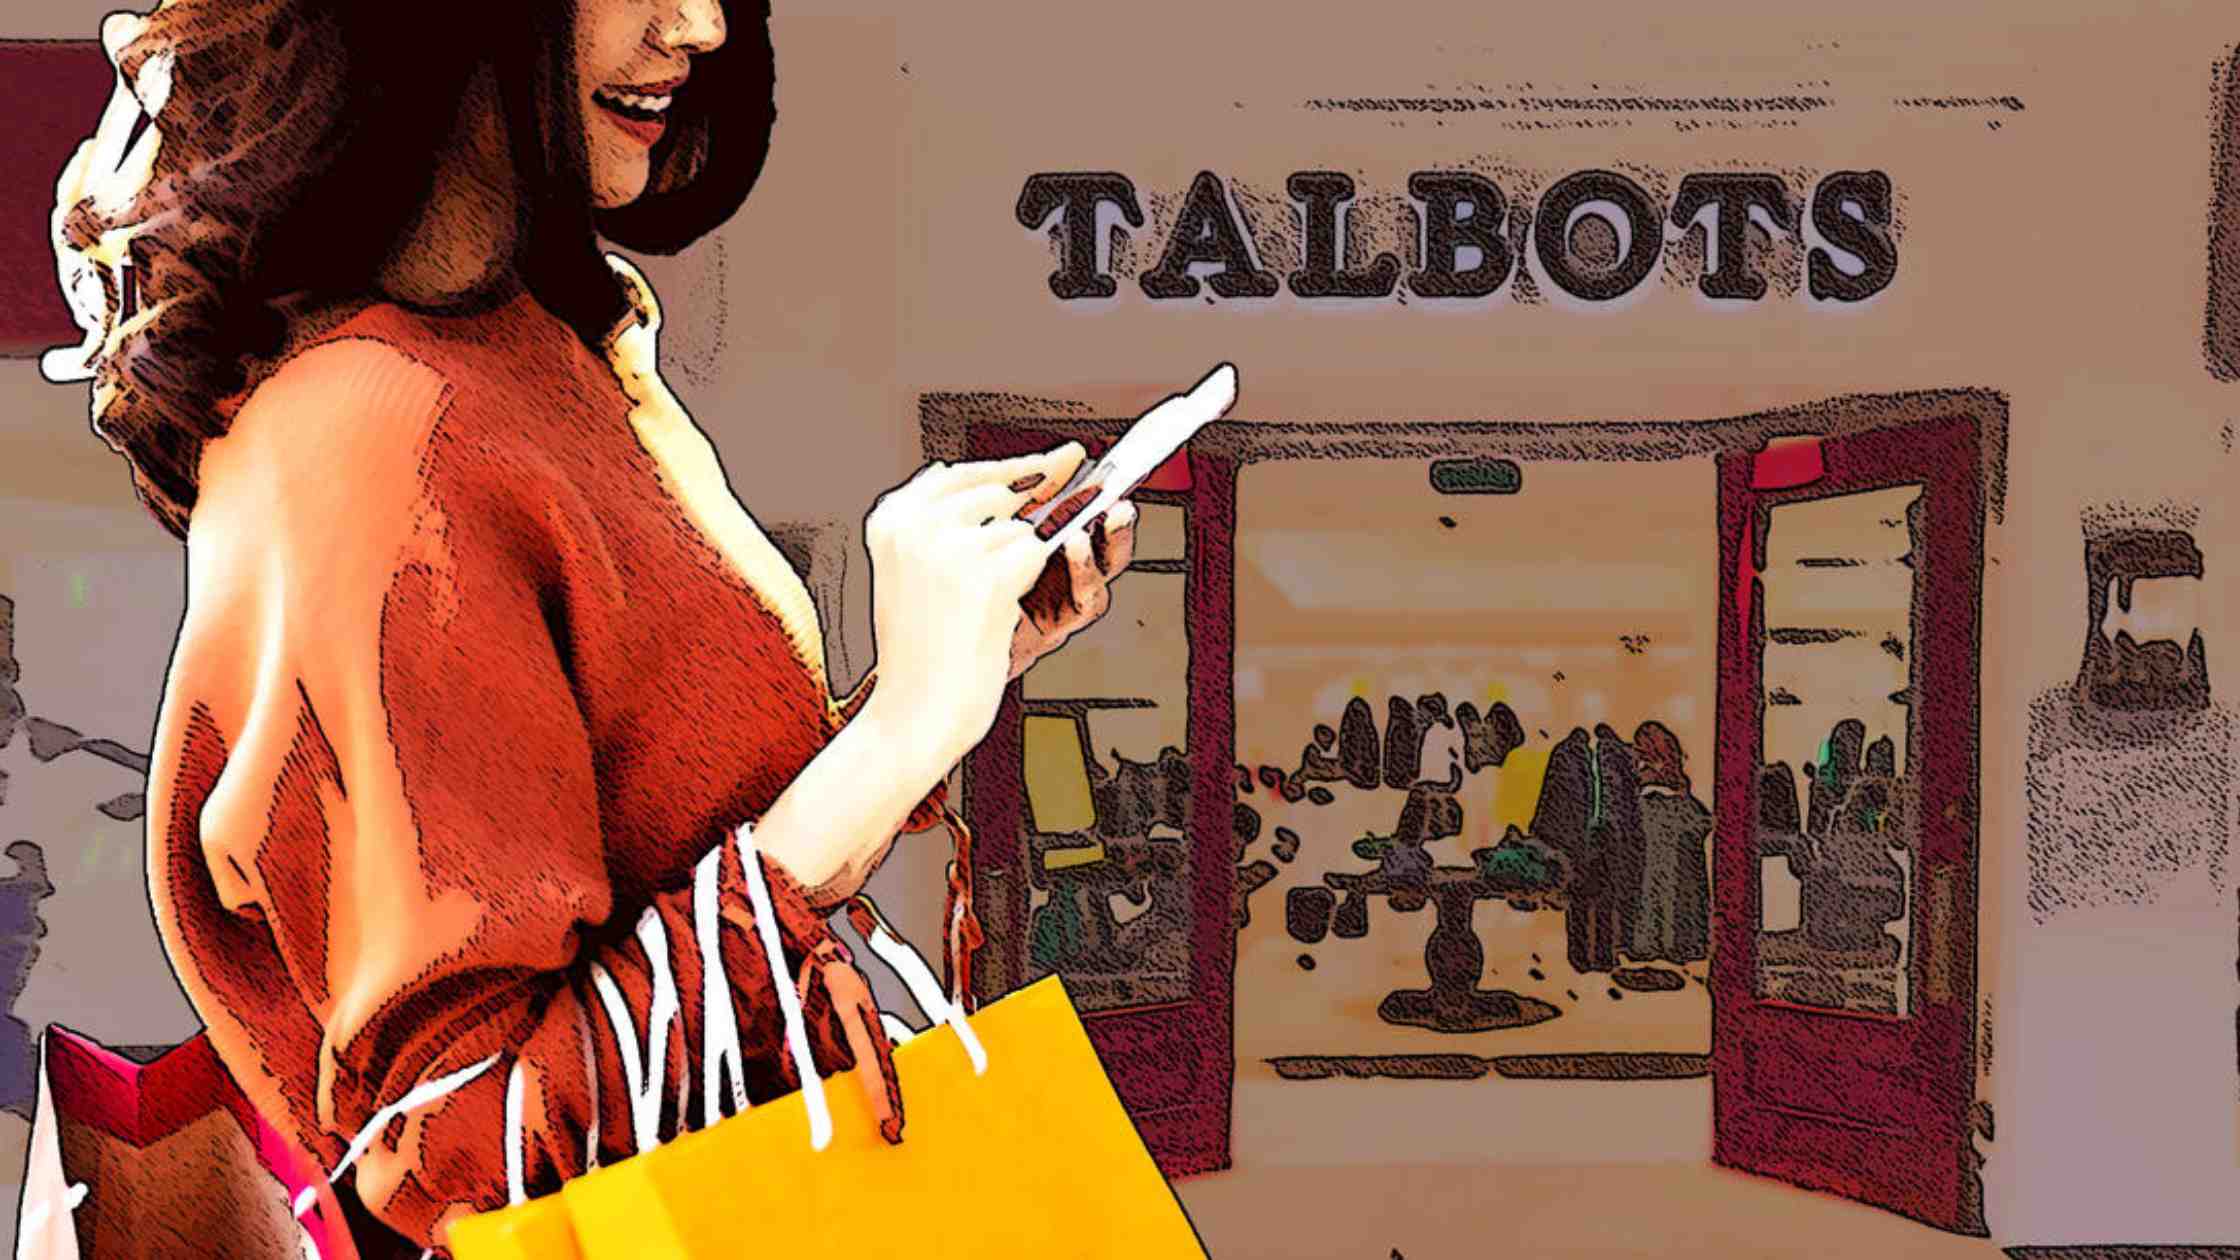 Clothing Chains, Including Talbots, Are Closing Stores